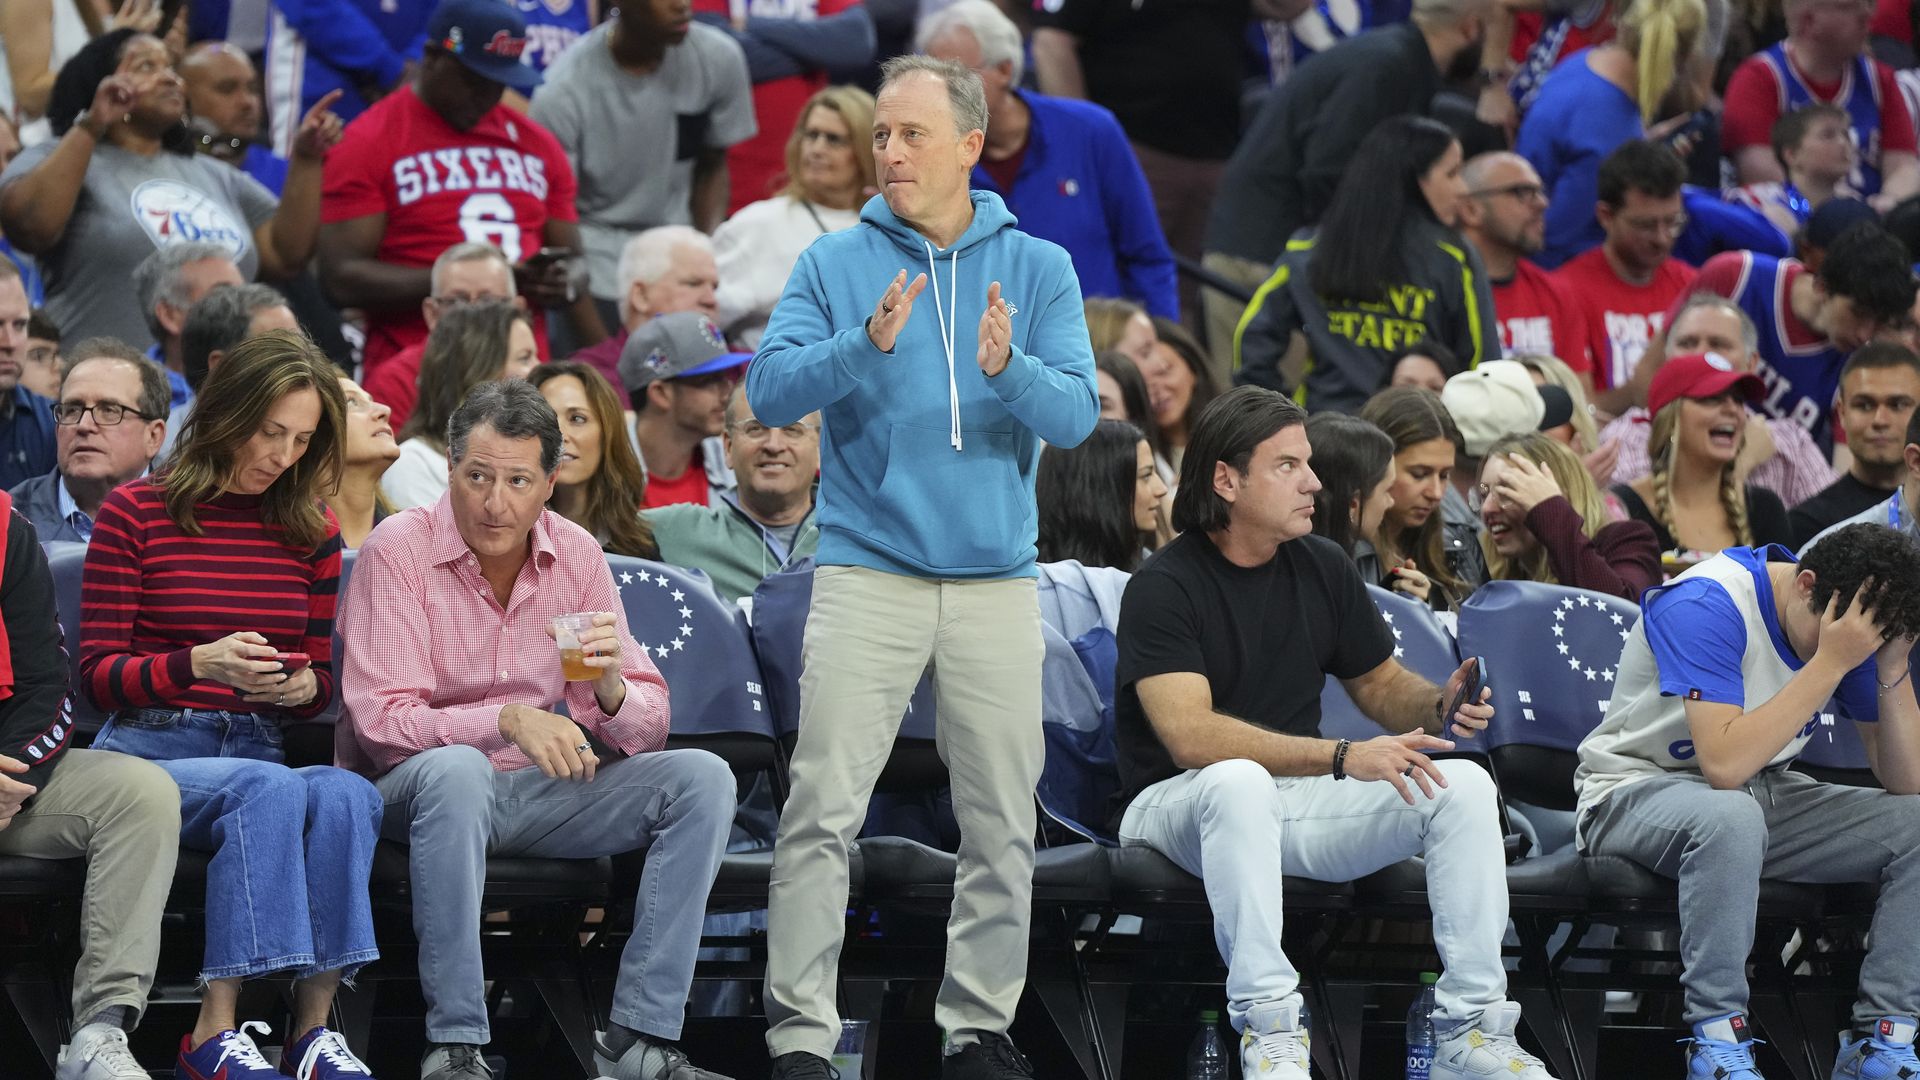 Josh Harris is standing and clapping courtside on the sidelines in between seated fans at a packed 76ers game.